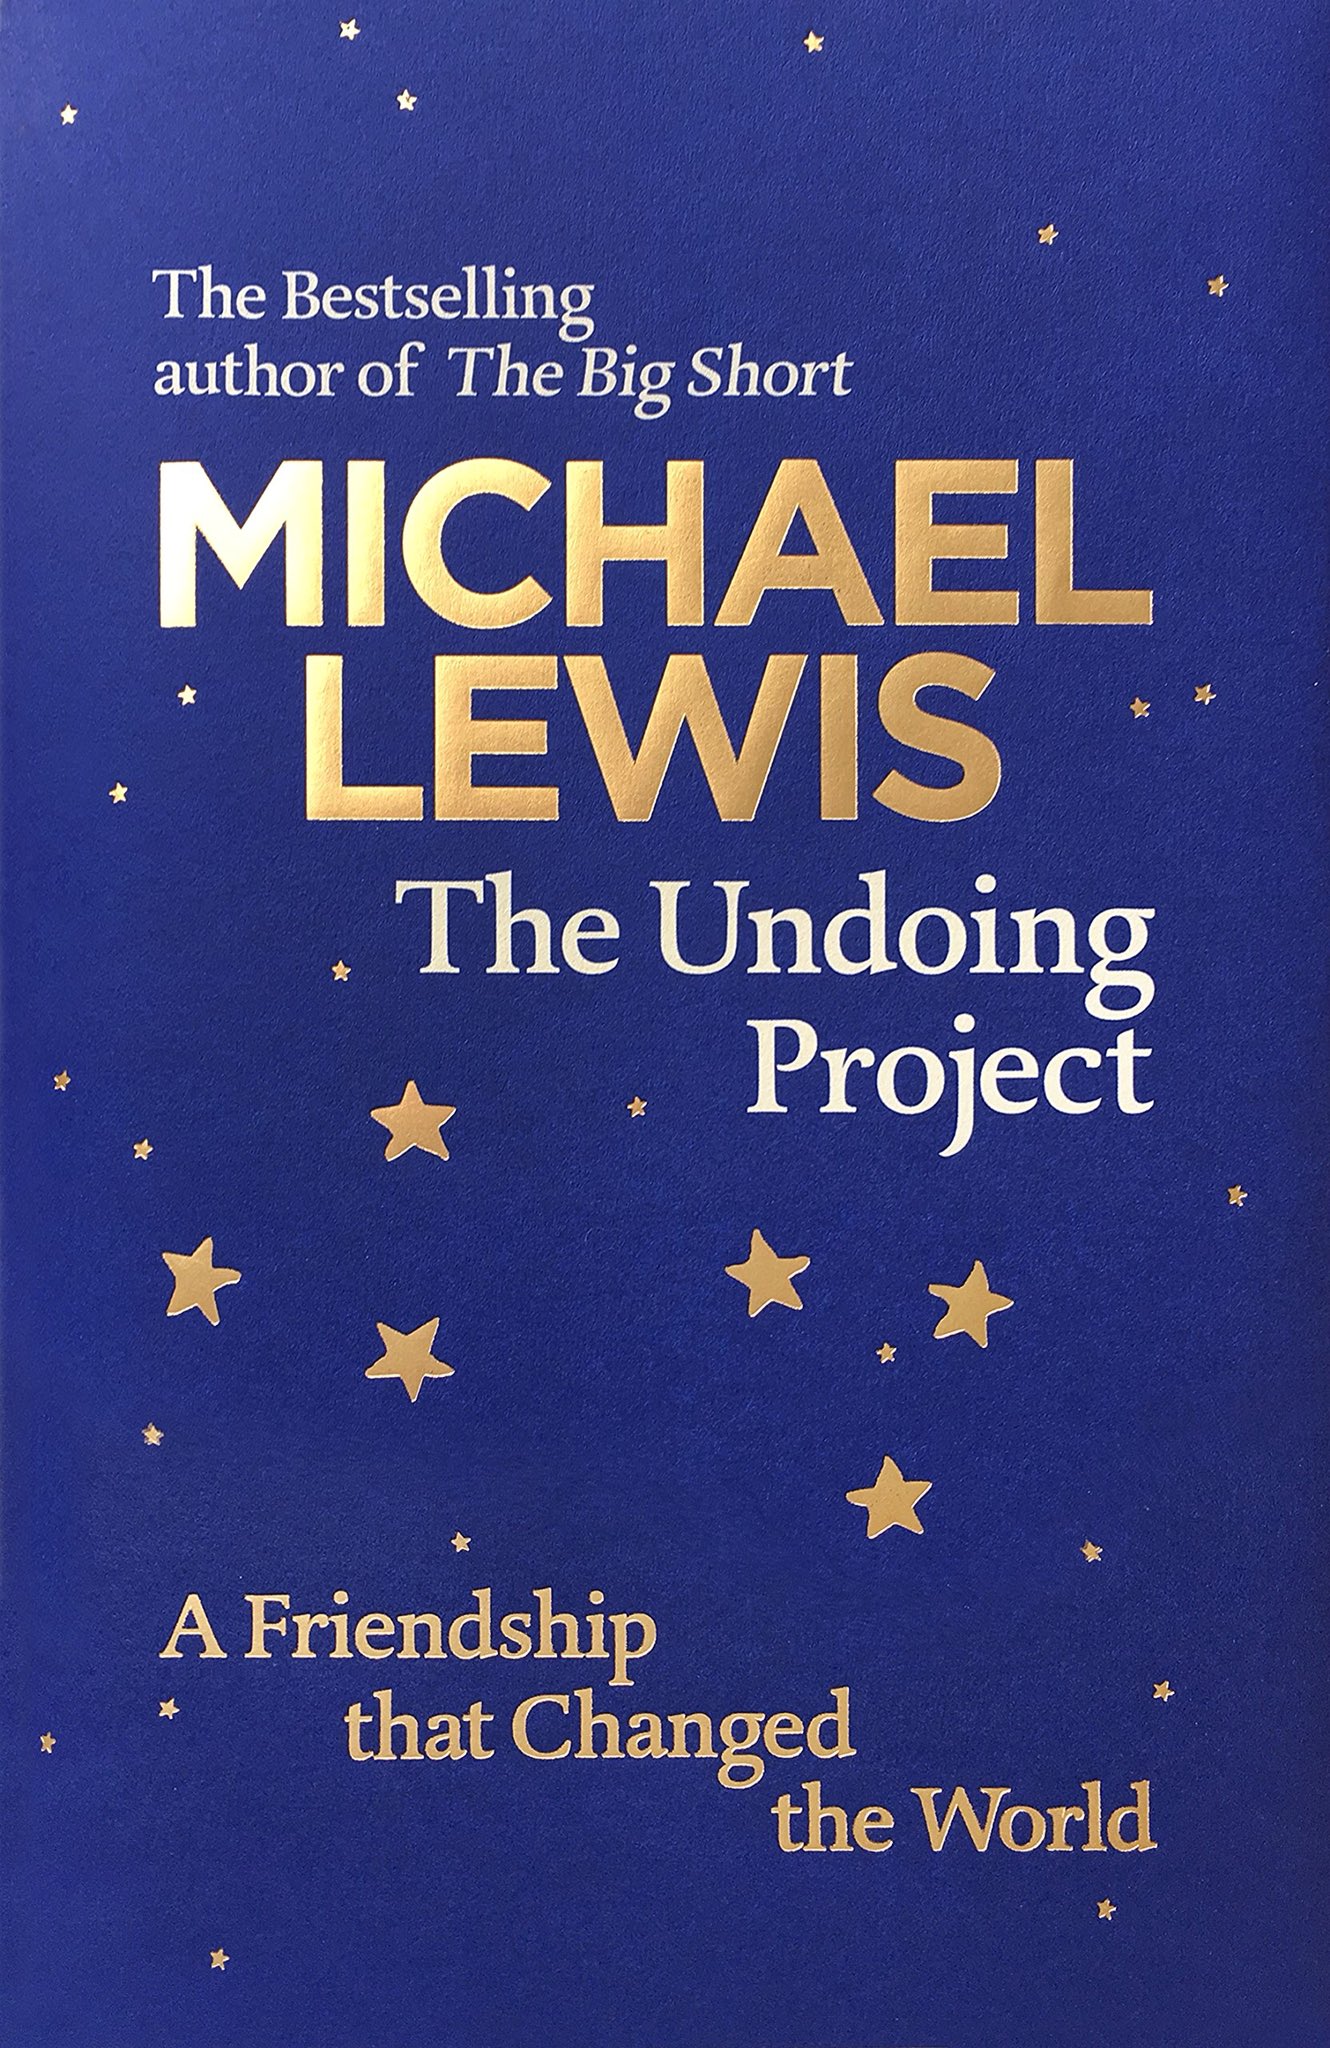 Brilliantly engaging talk by Michael Lewis @FestivalofIdeas #economicsfest today. Couldn’t recommend his book on Kahneman & Tversky more wholeheartedly! https://t.co/5dzgXapaGP